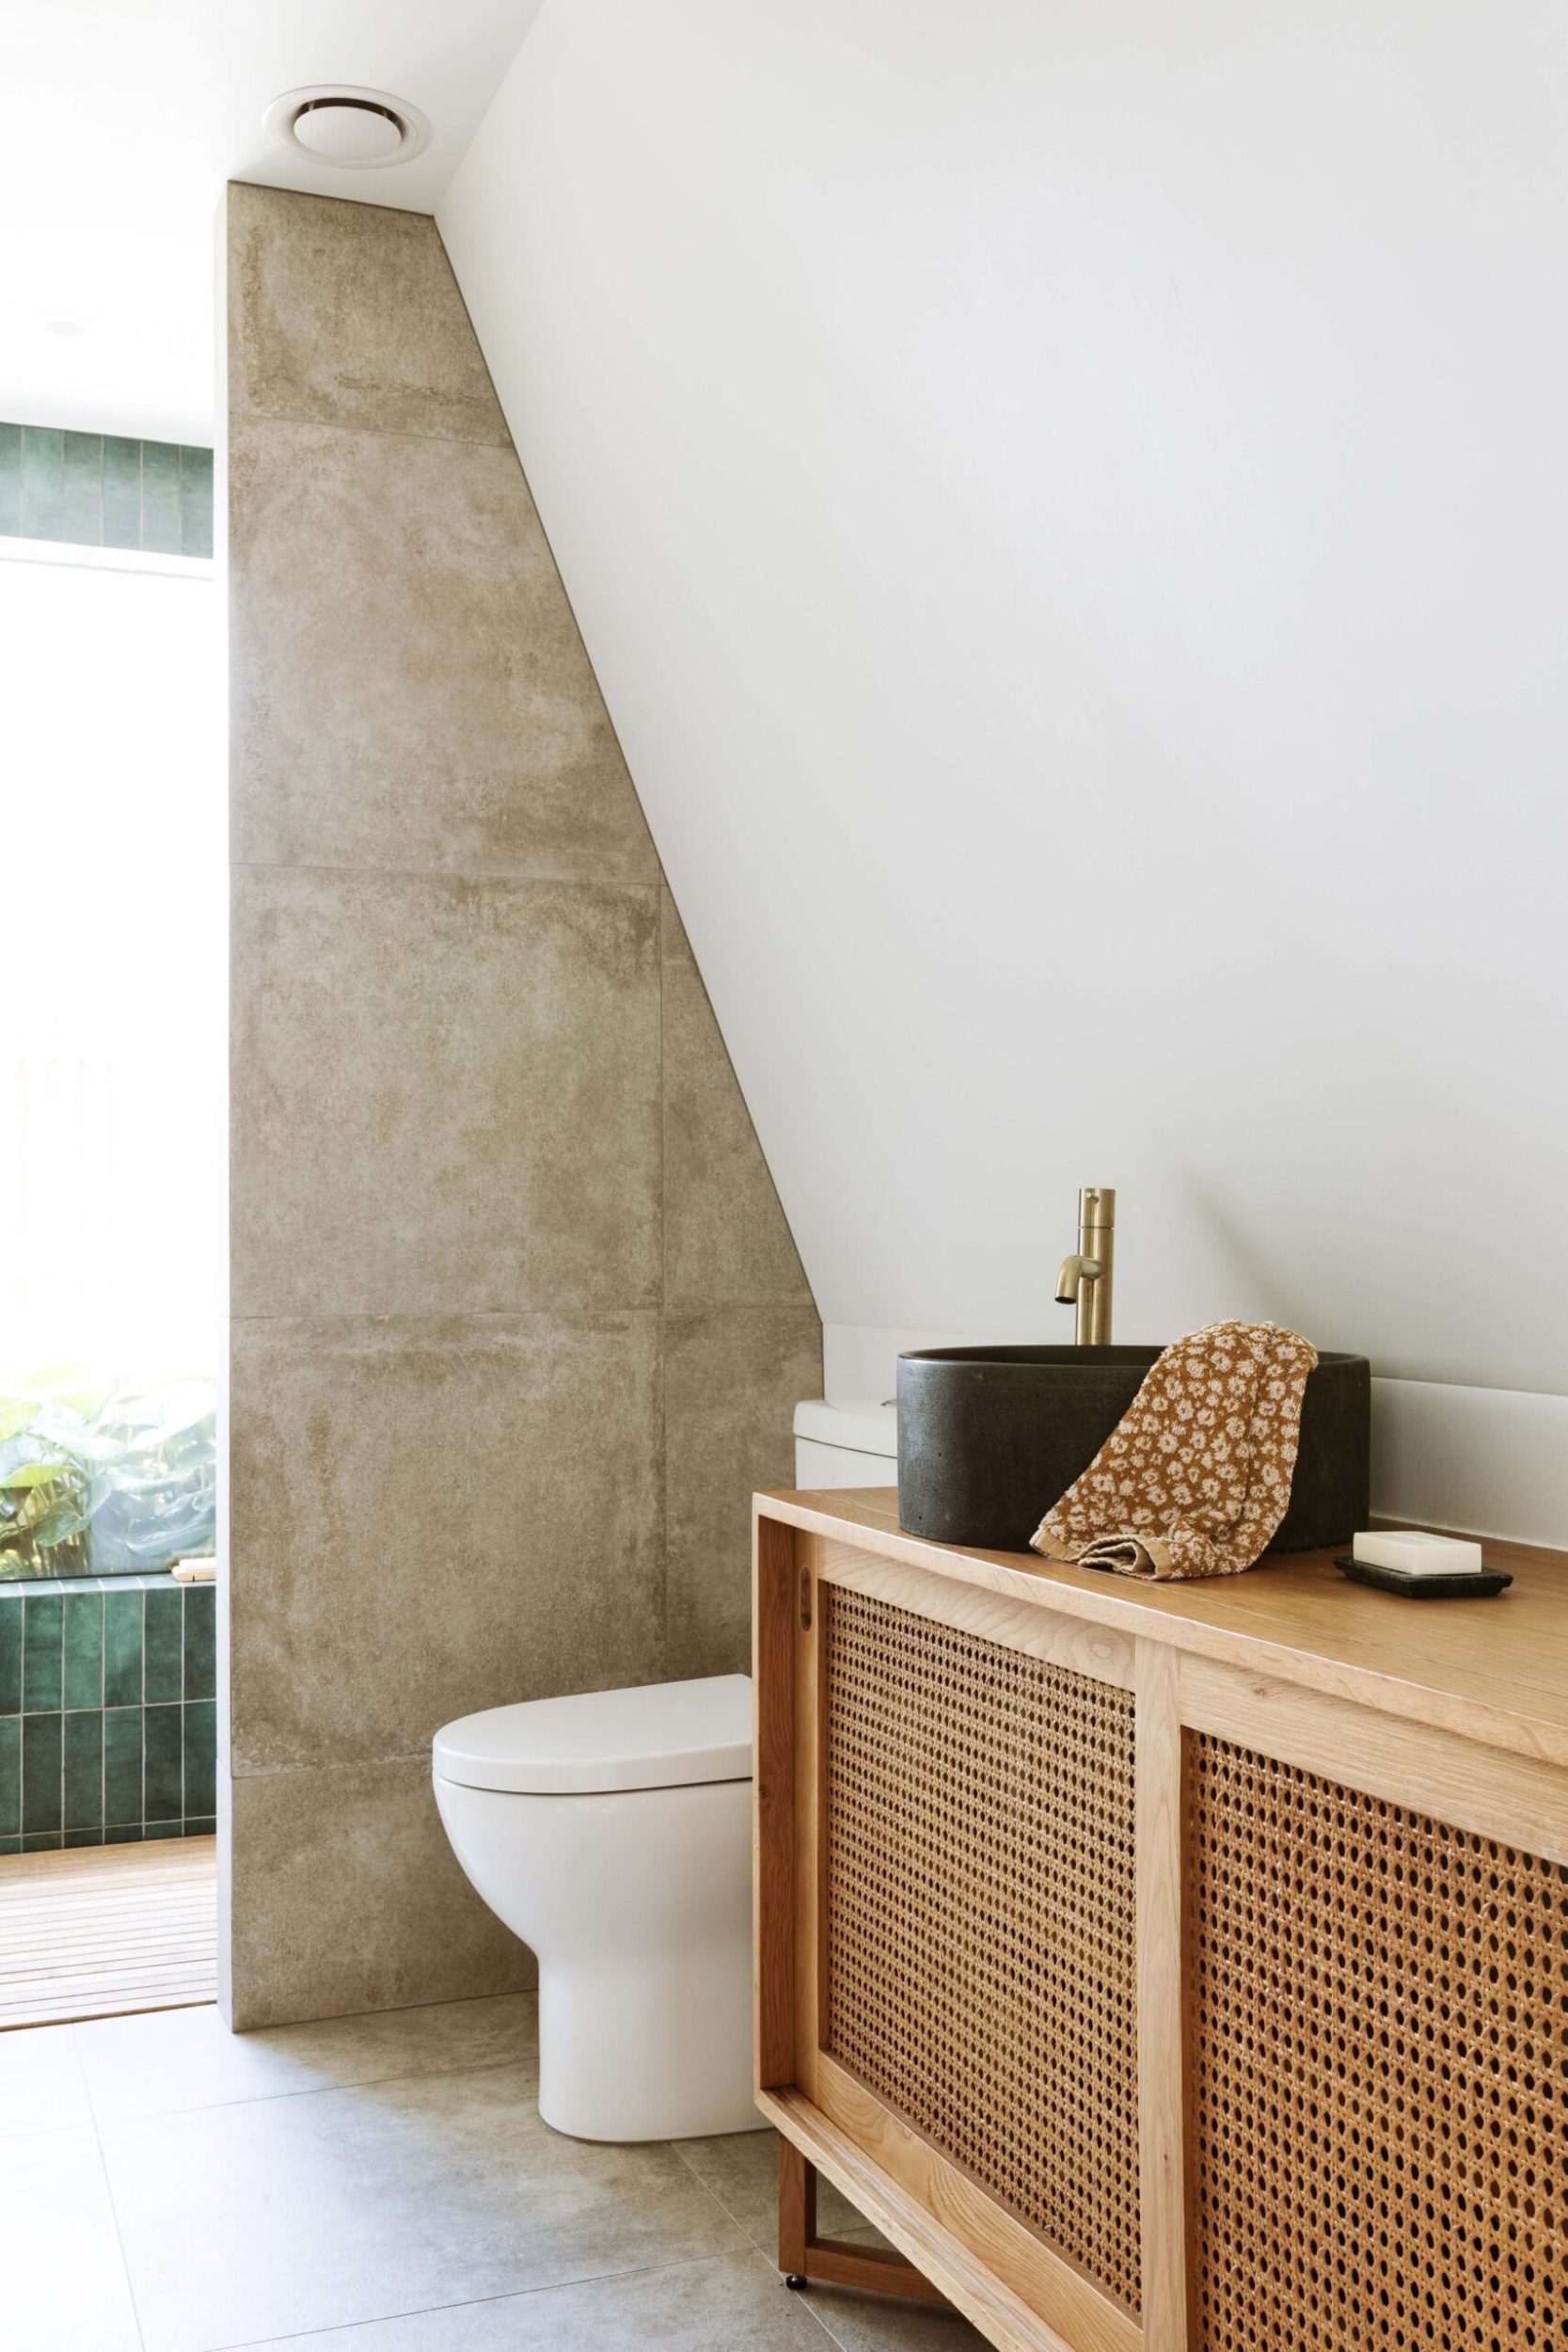 A wooden and rattan bathroom vanity with large format grey tiles and a white toilet